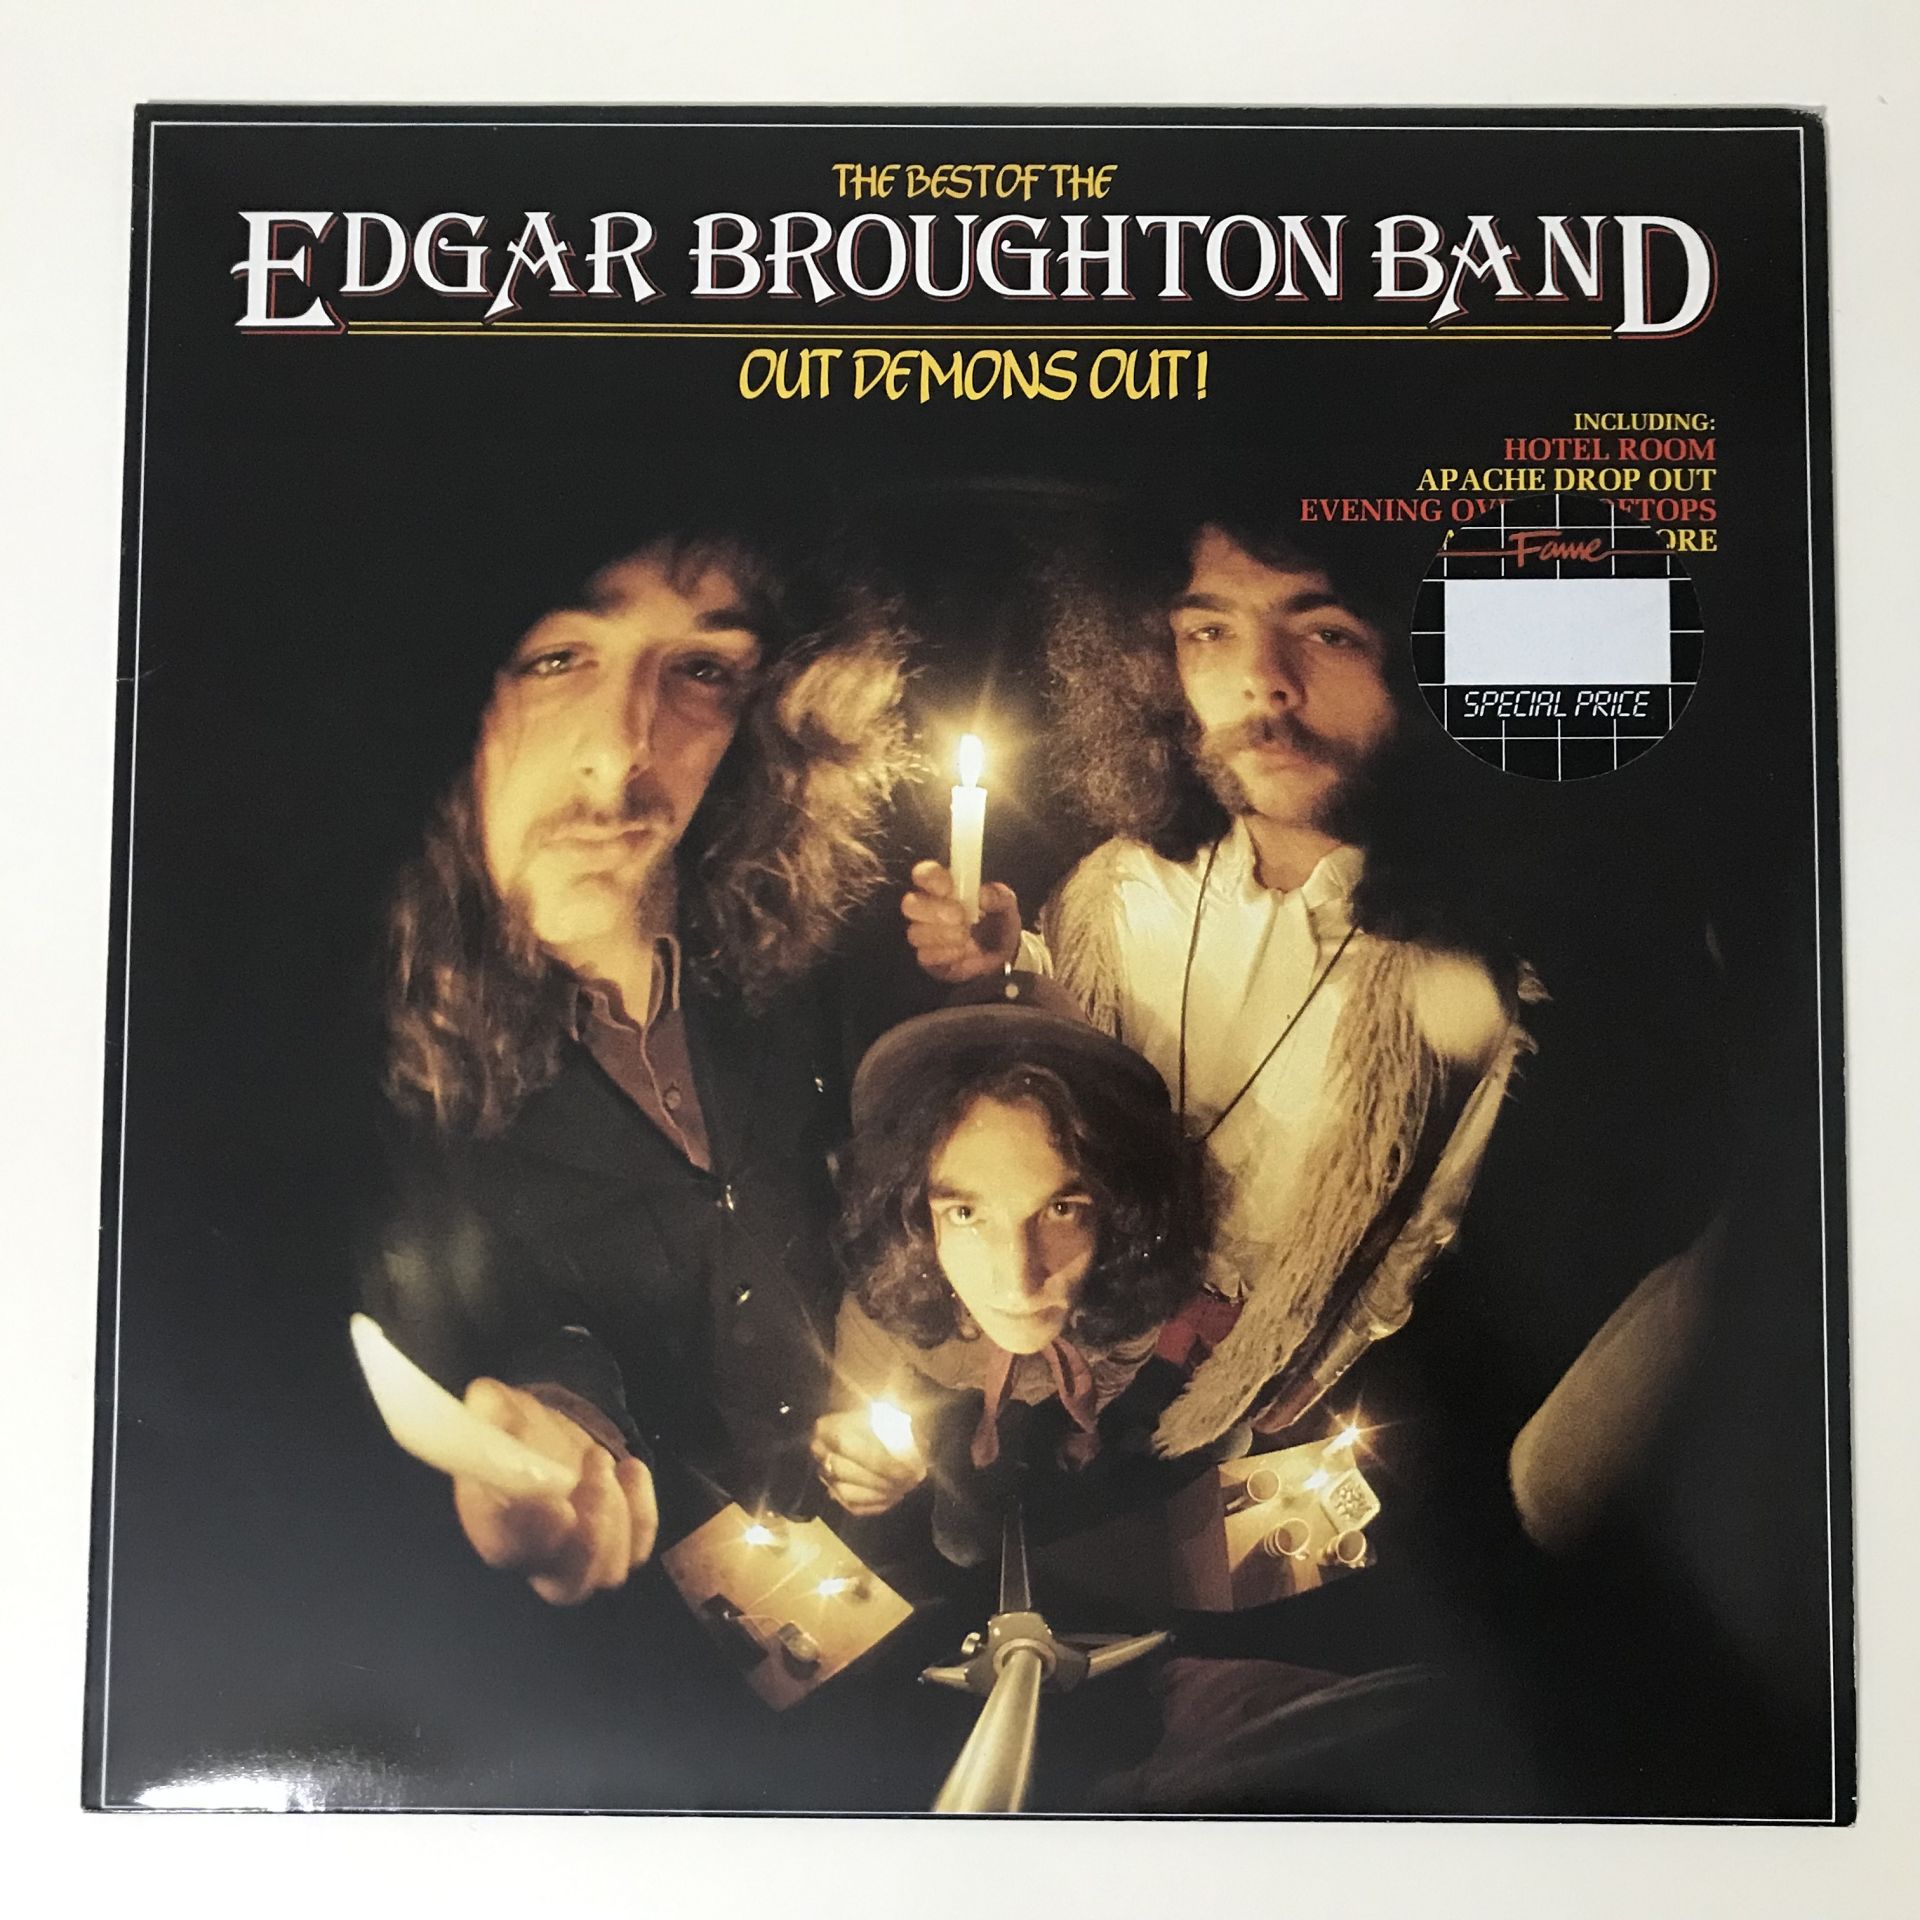 The Best Of The Edgar Broughton Band: Out Demons Out!